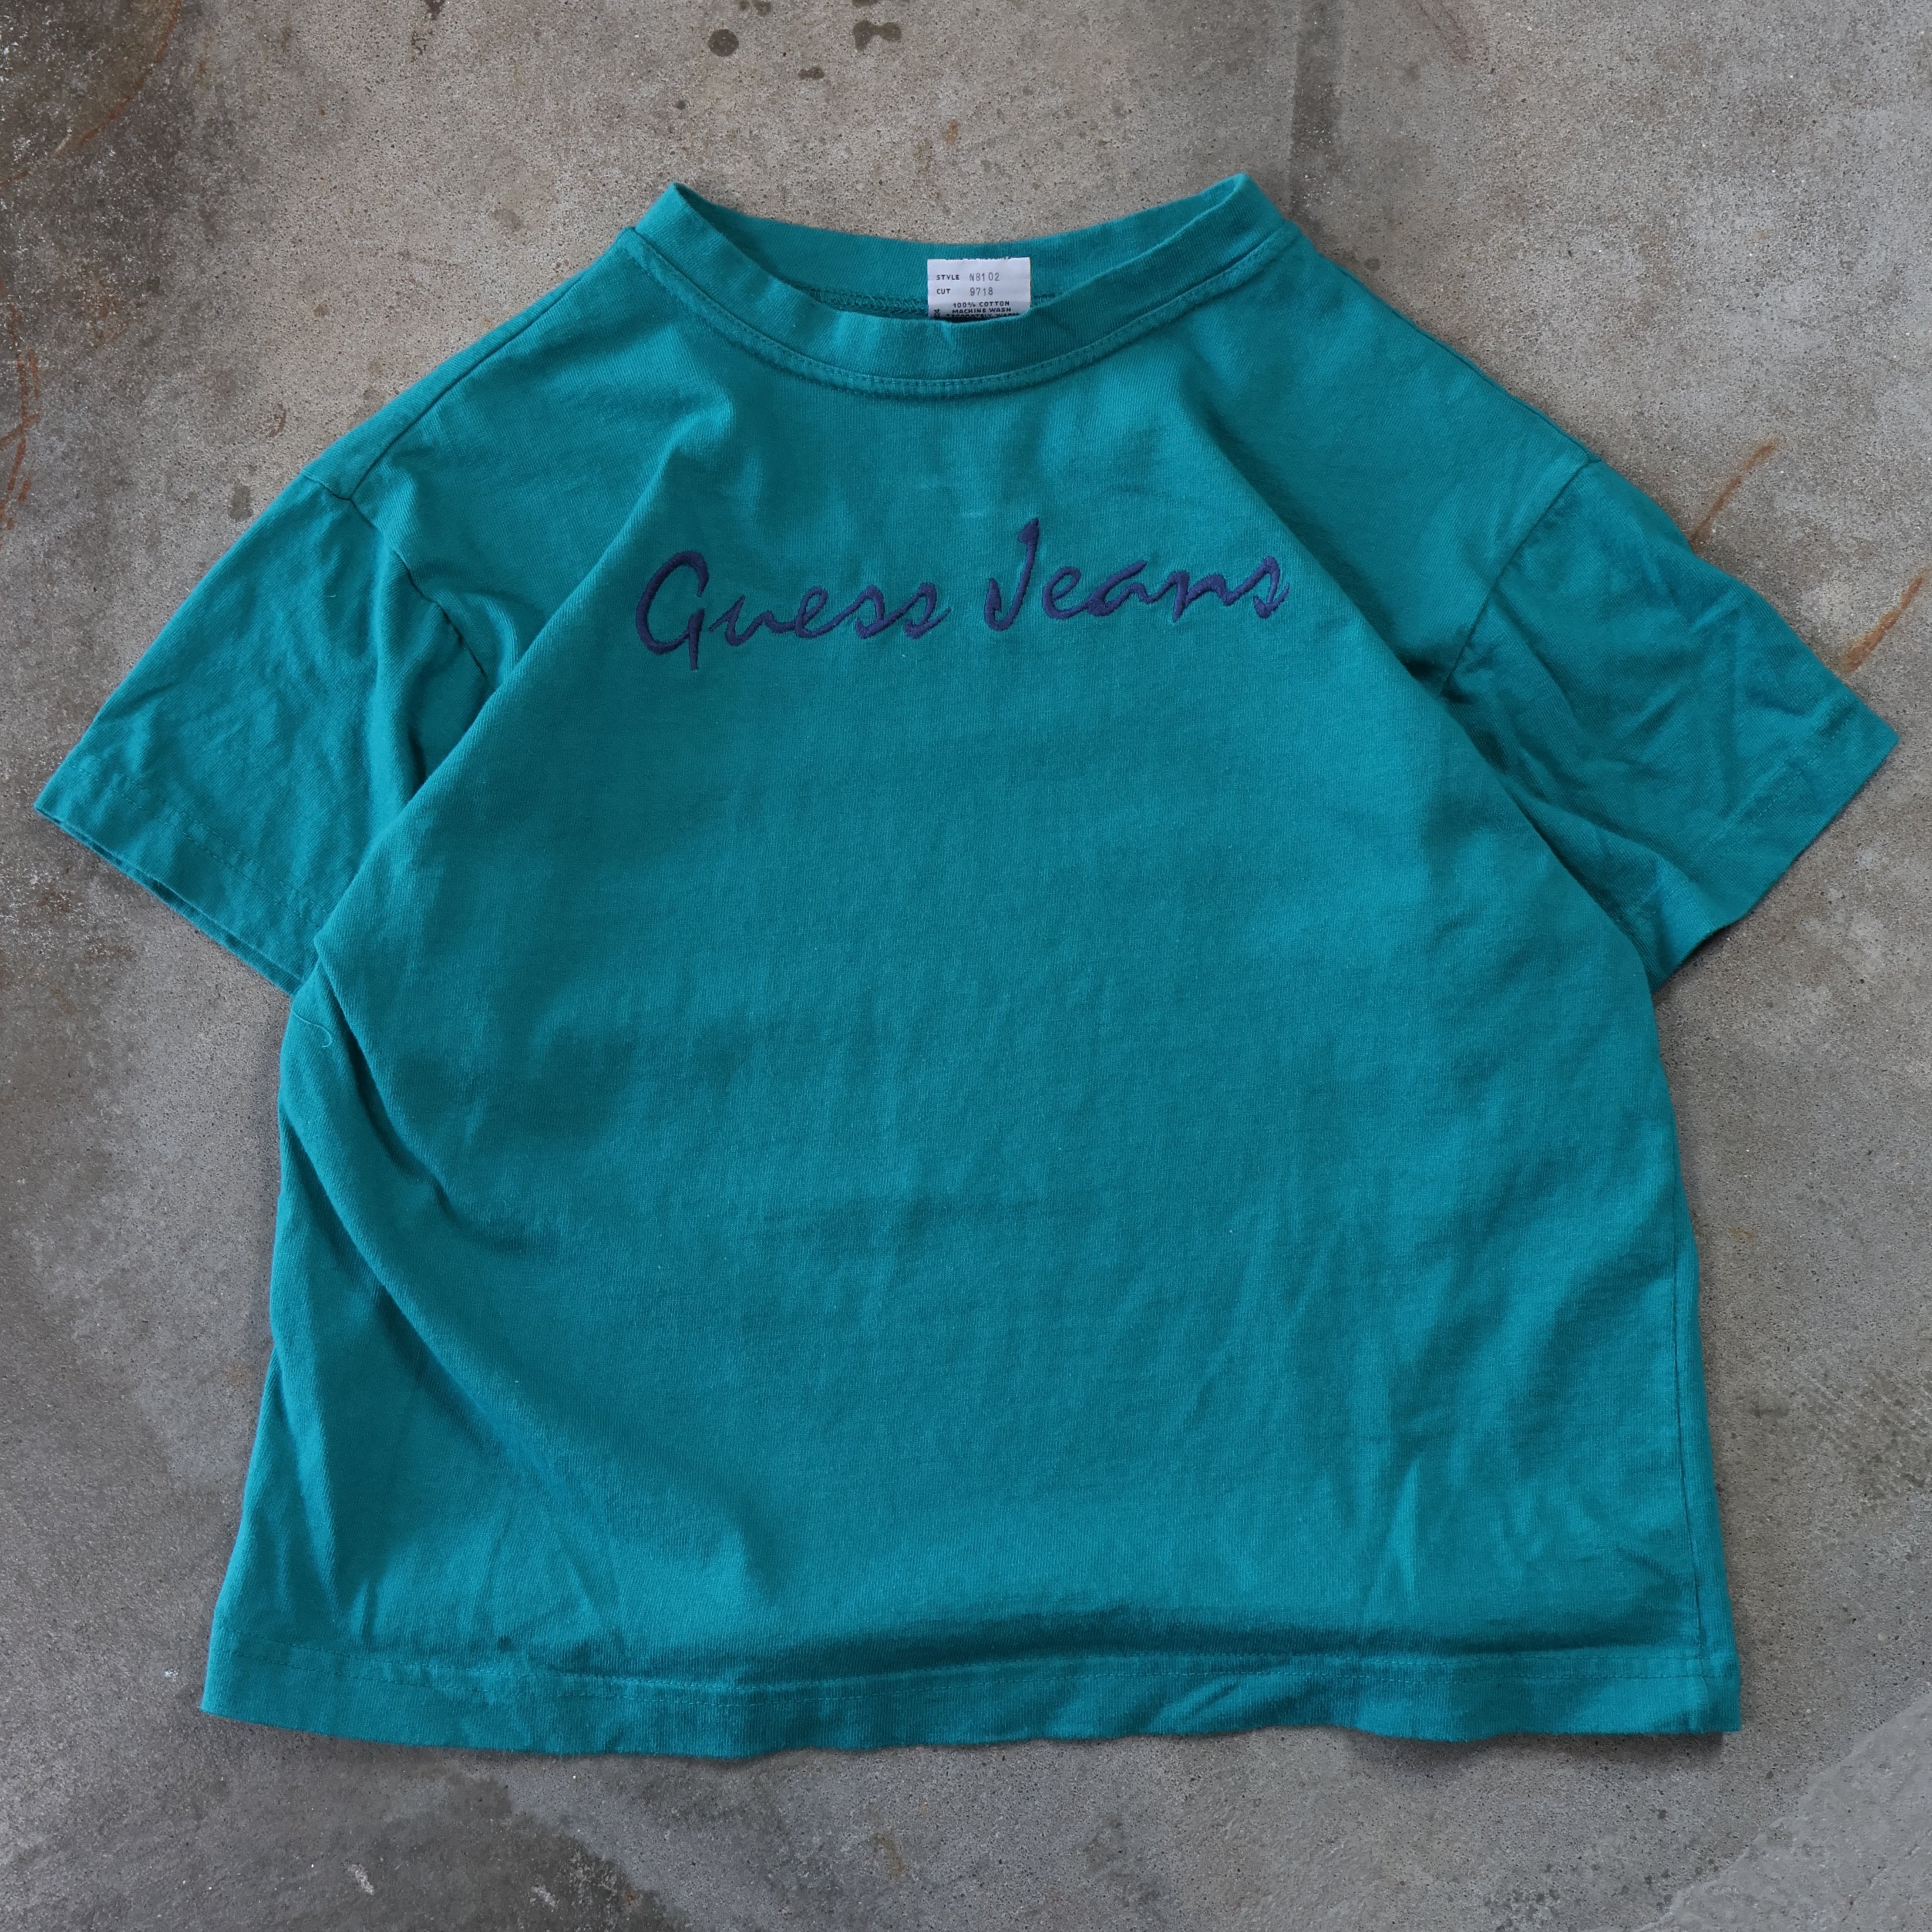 Teal Guess Jeans T-Shirt 90s (Small)